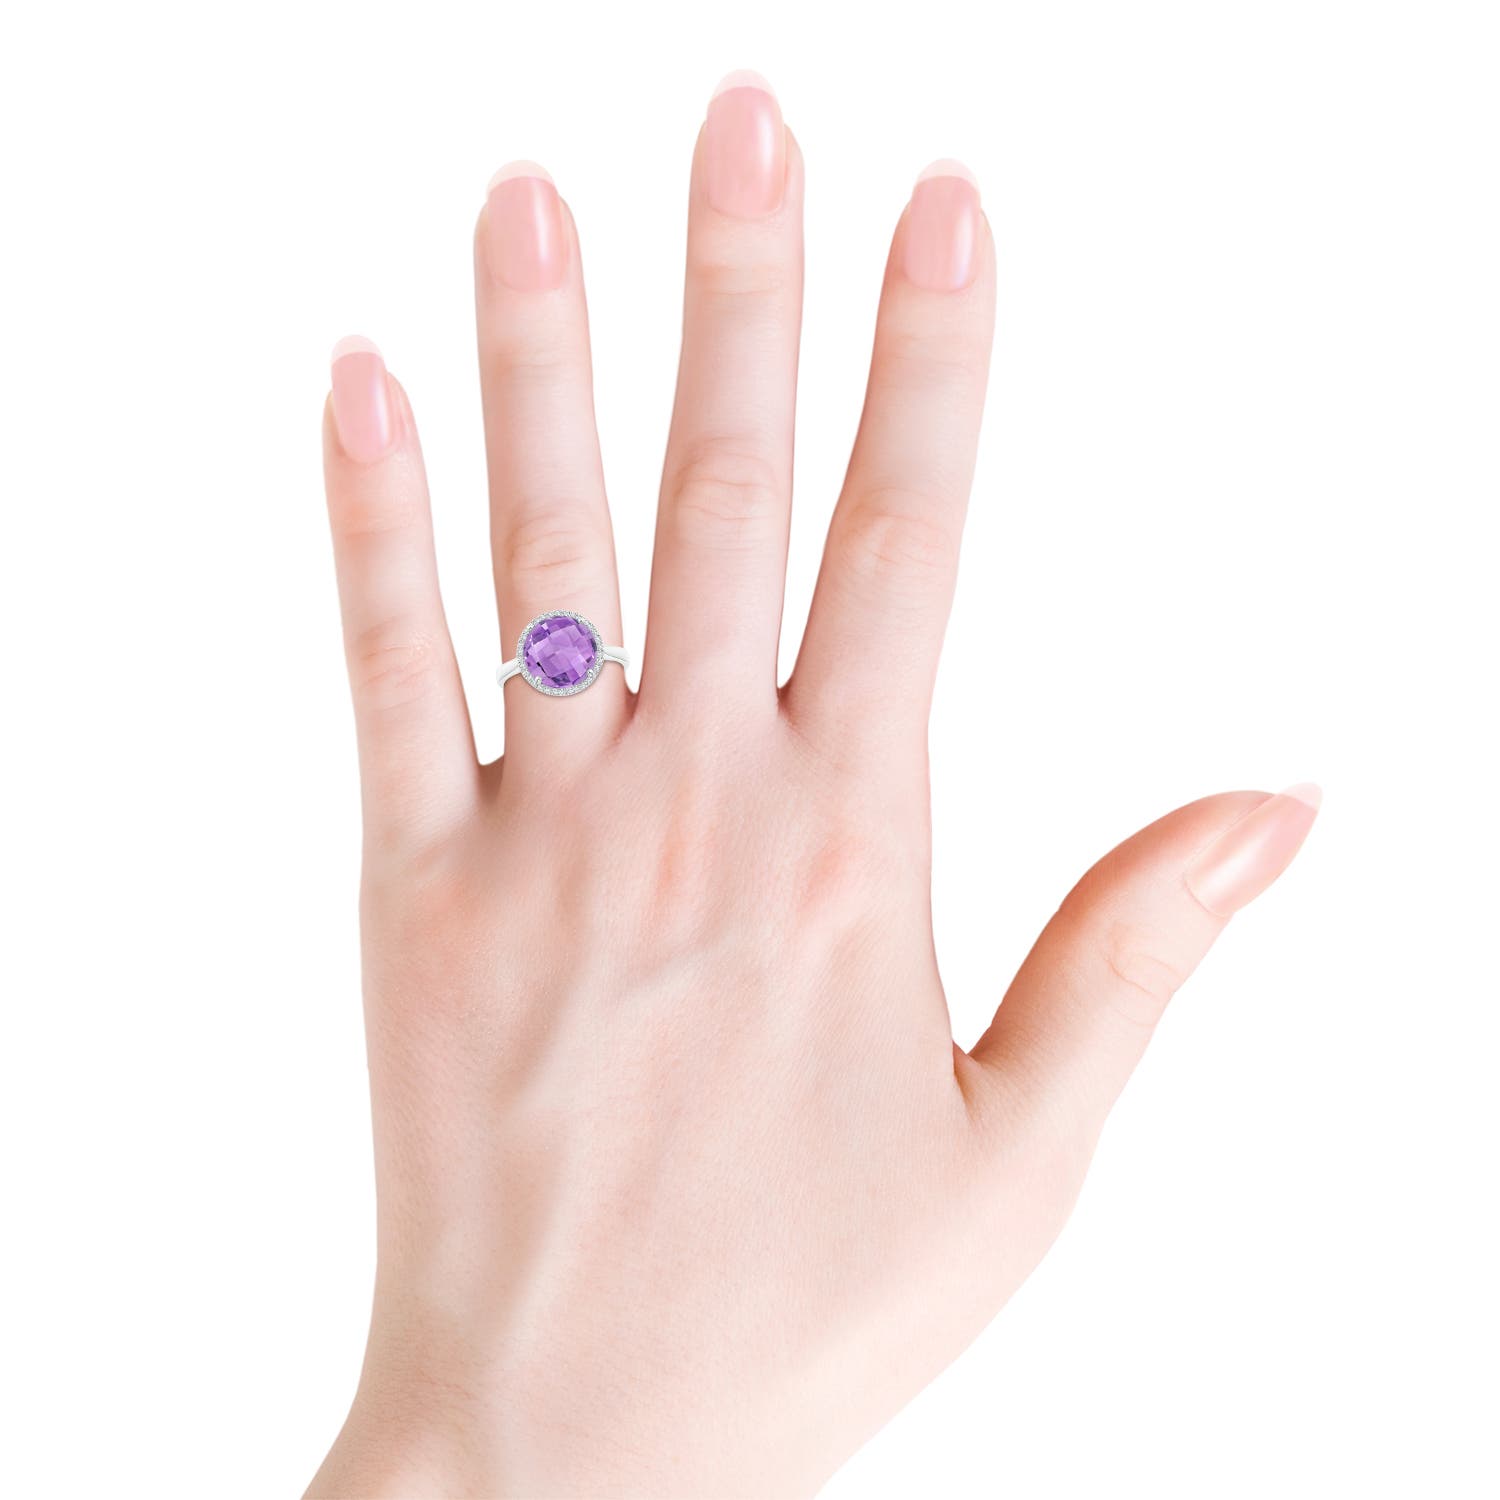 A - Amethyst / 3.77 CT / 14 KT White Gold